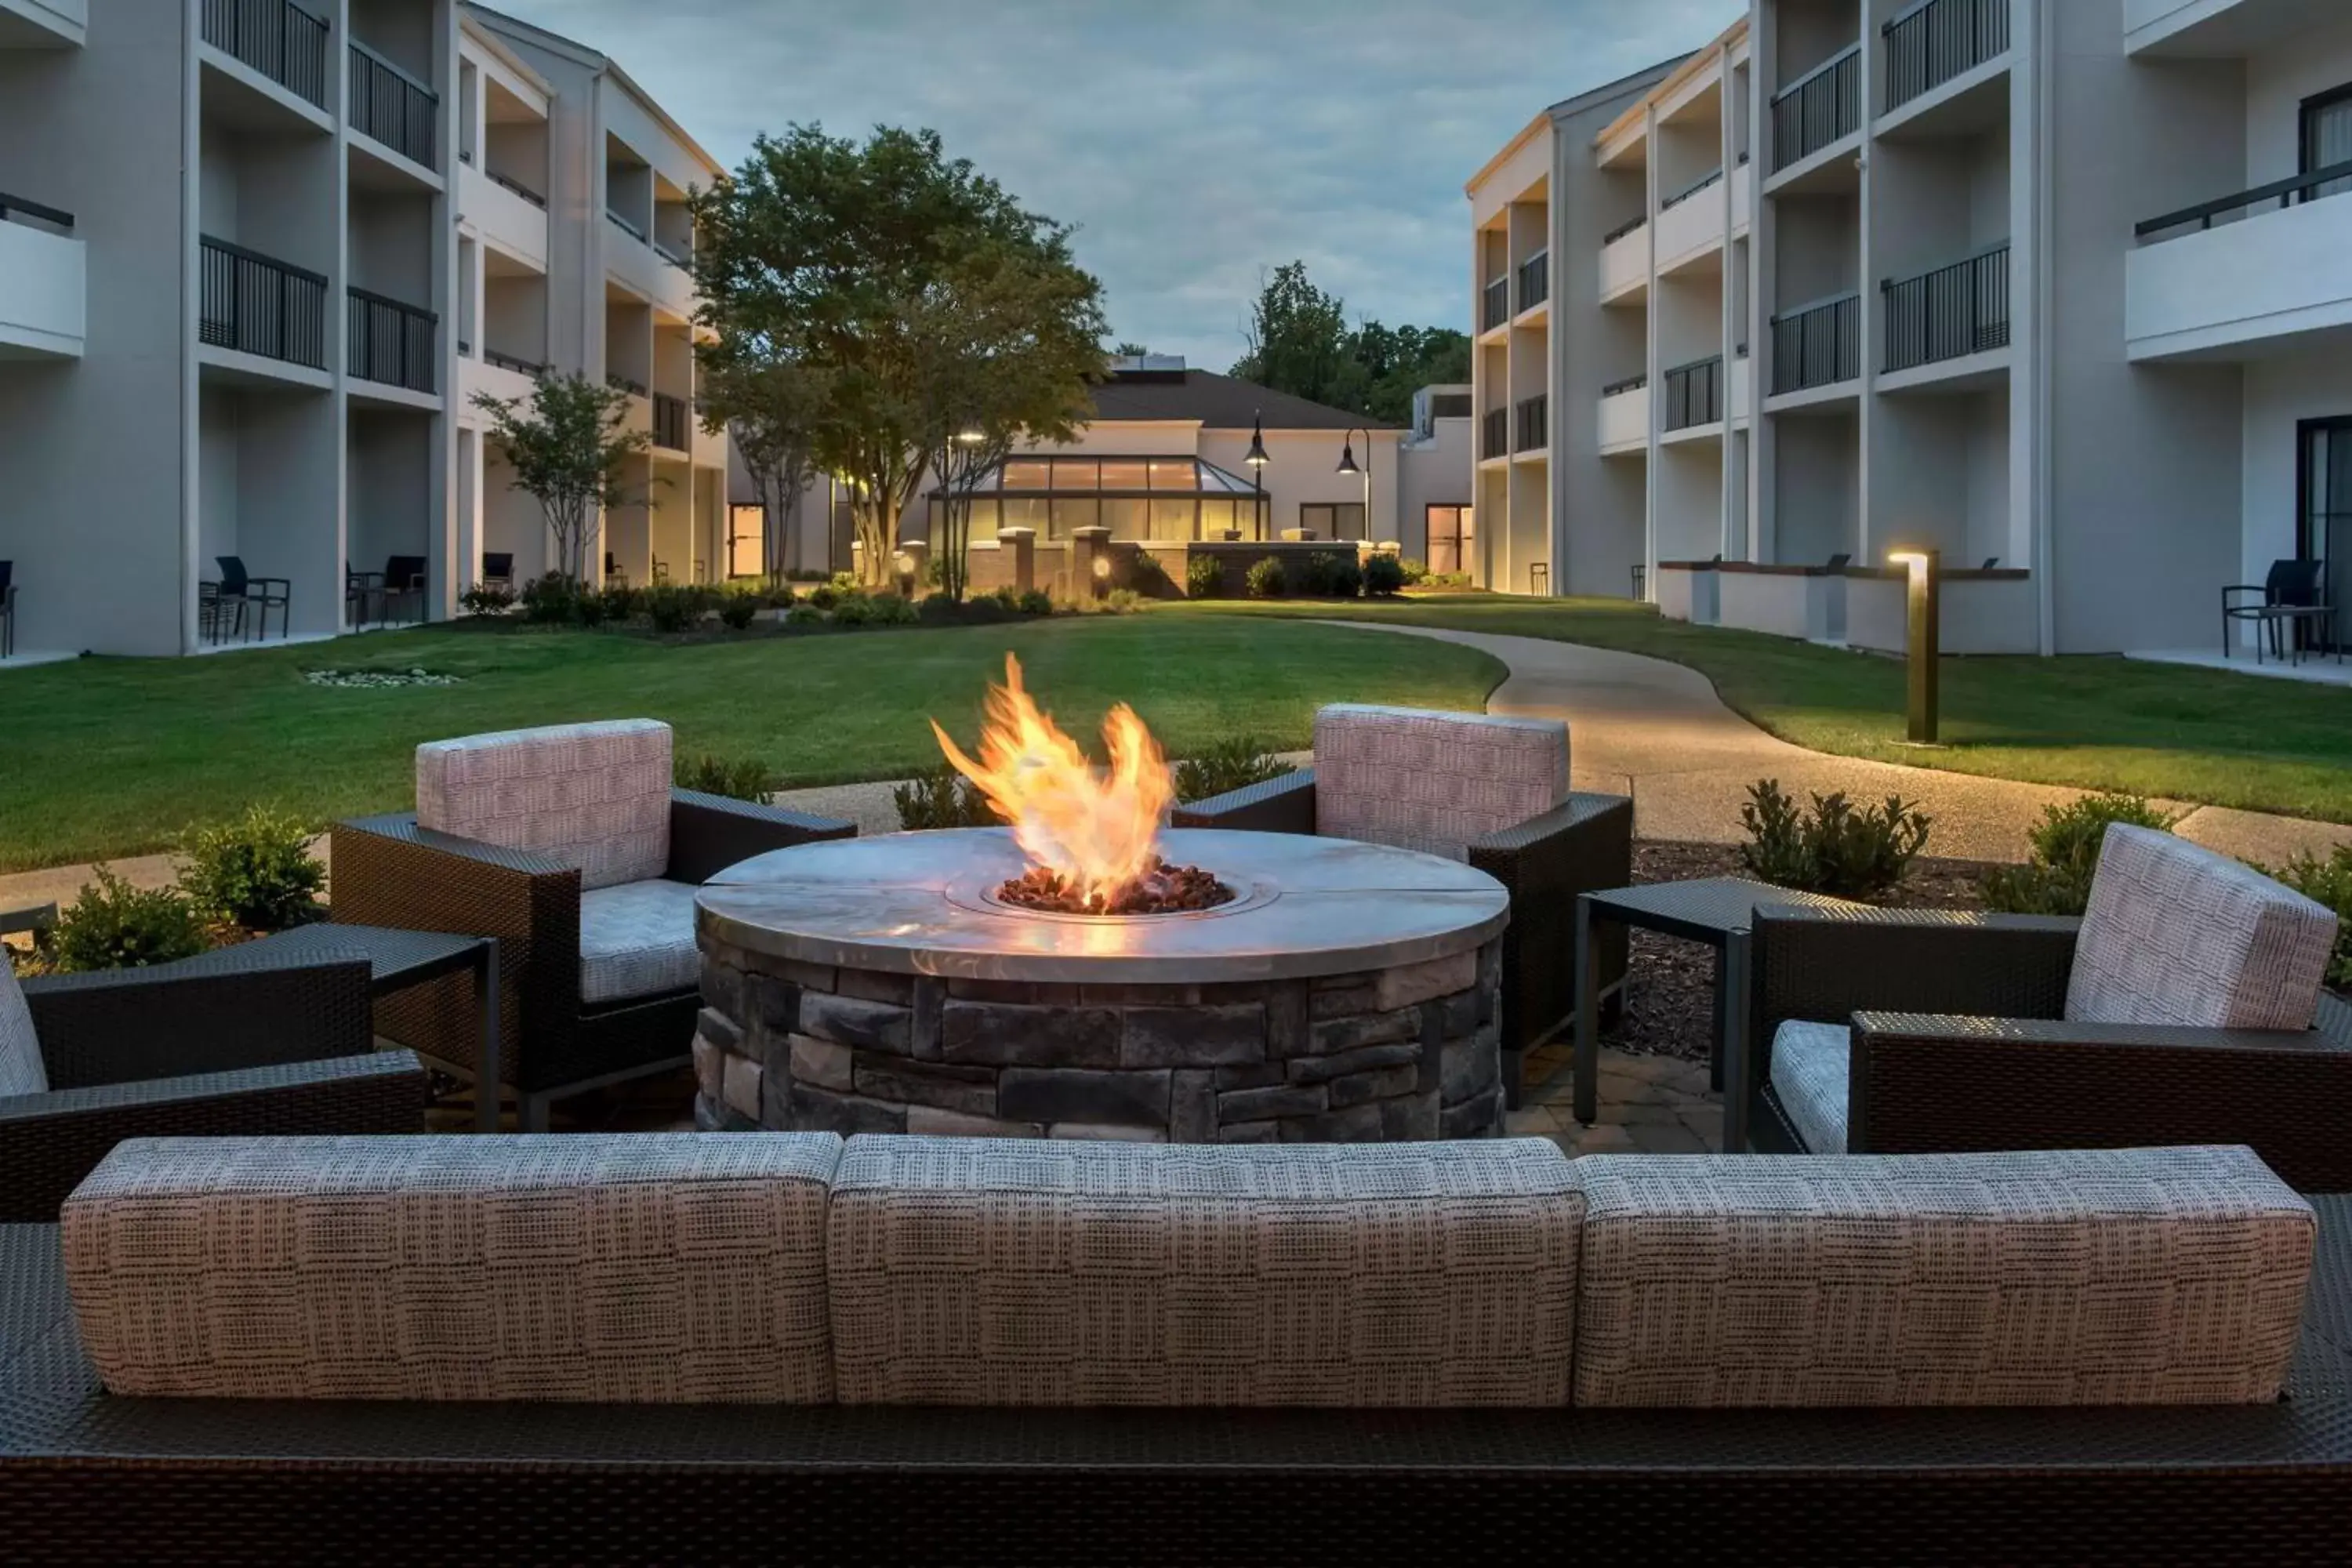 Property building in Courtyard by Marriott Annapolis